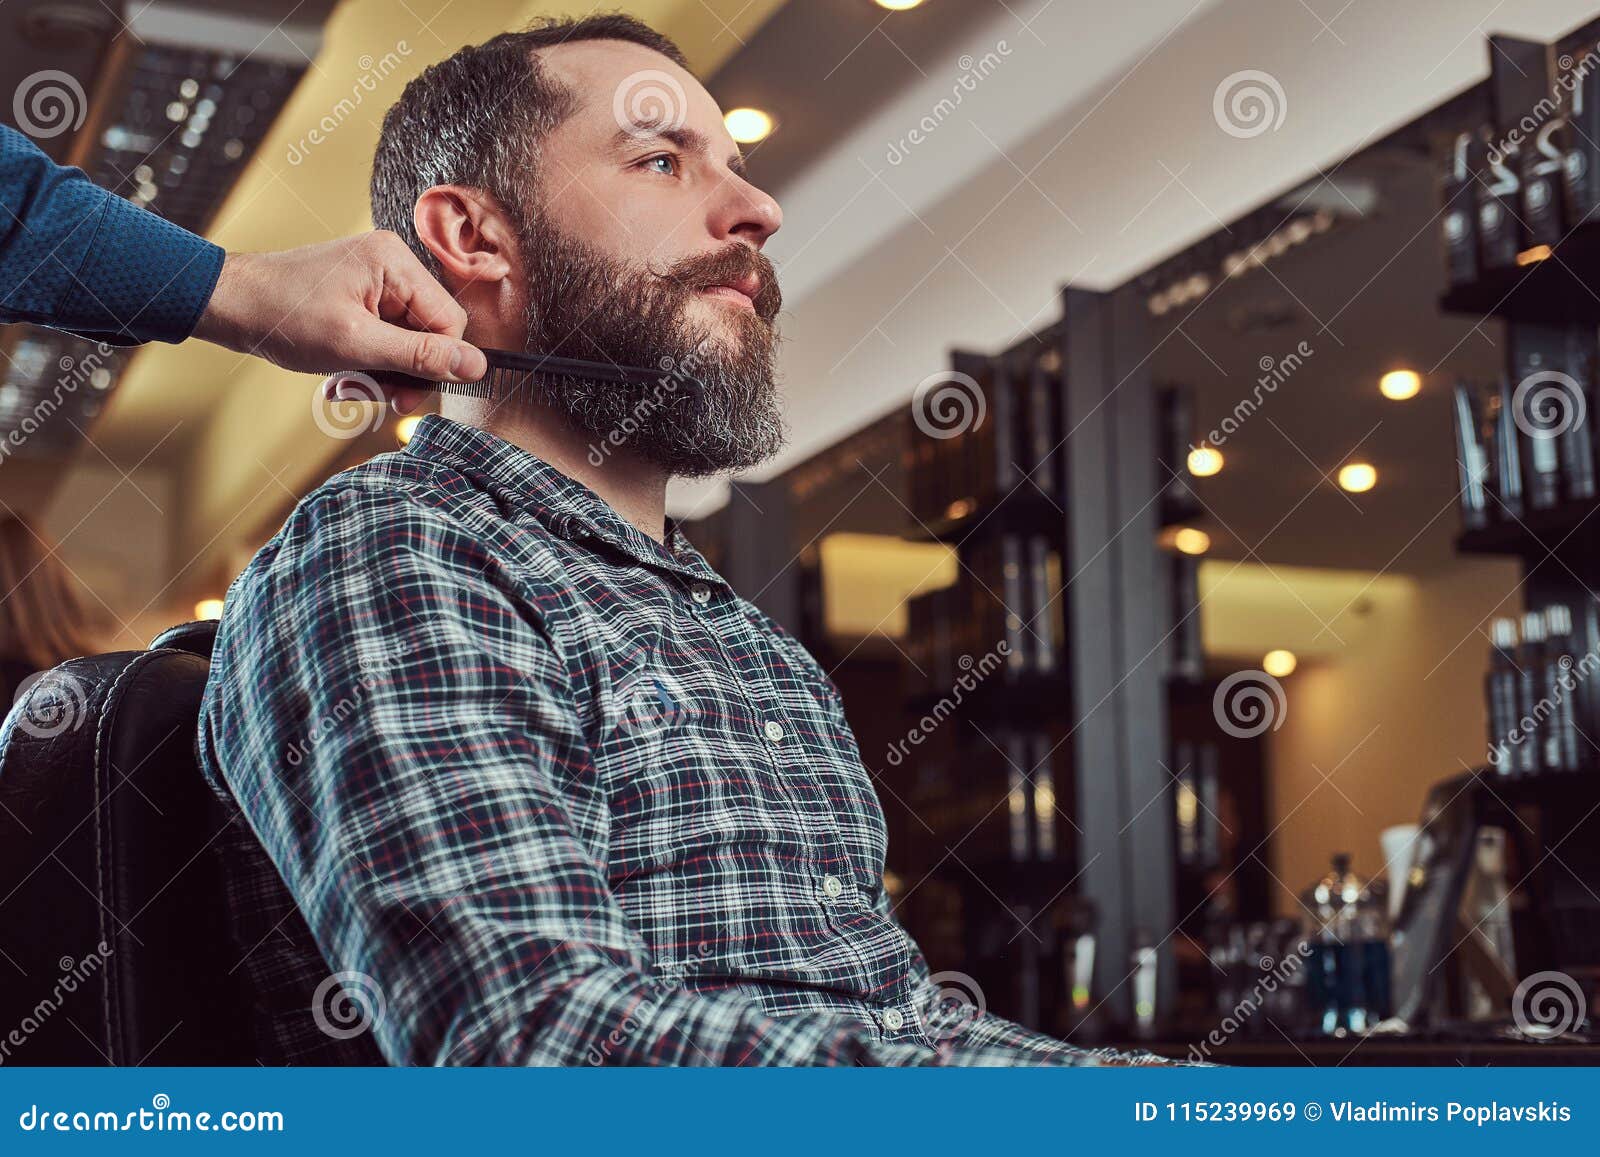 Professional Barber Working with a Client in a Hairdressing Salon ...